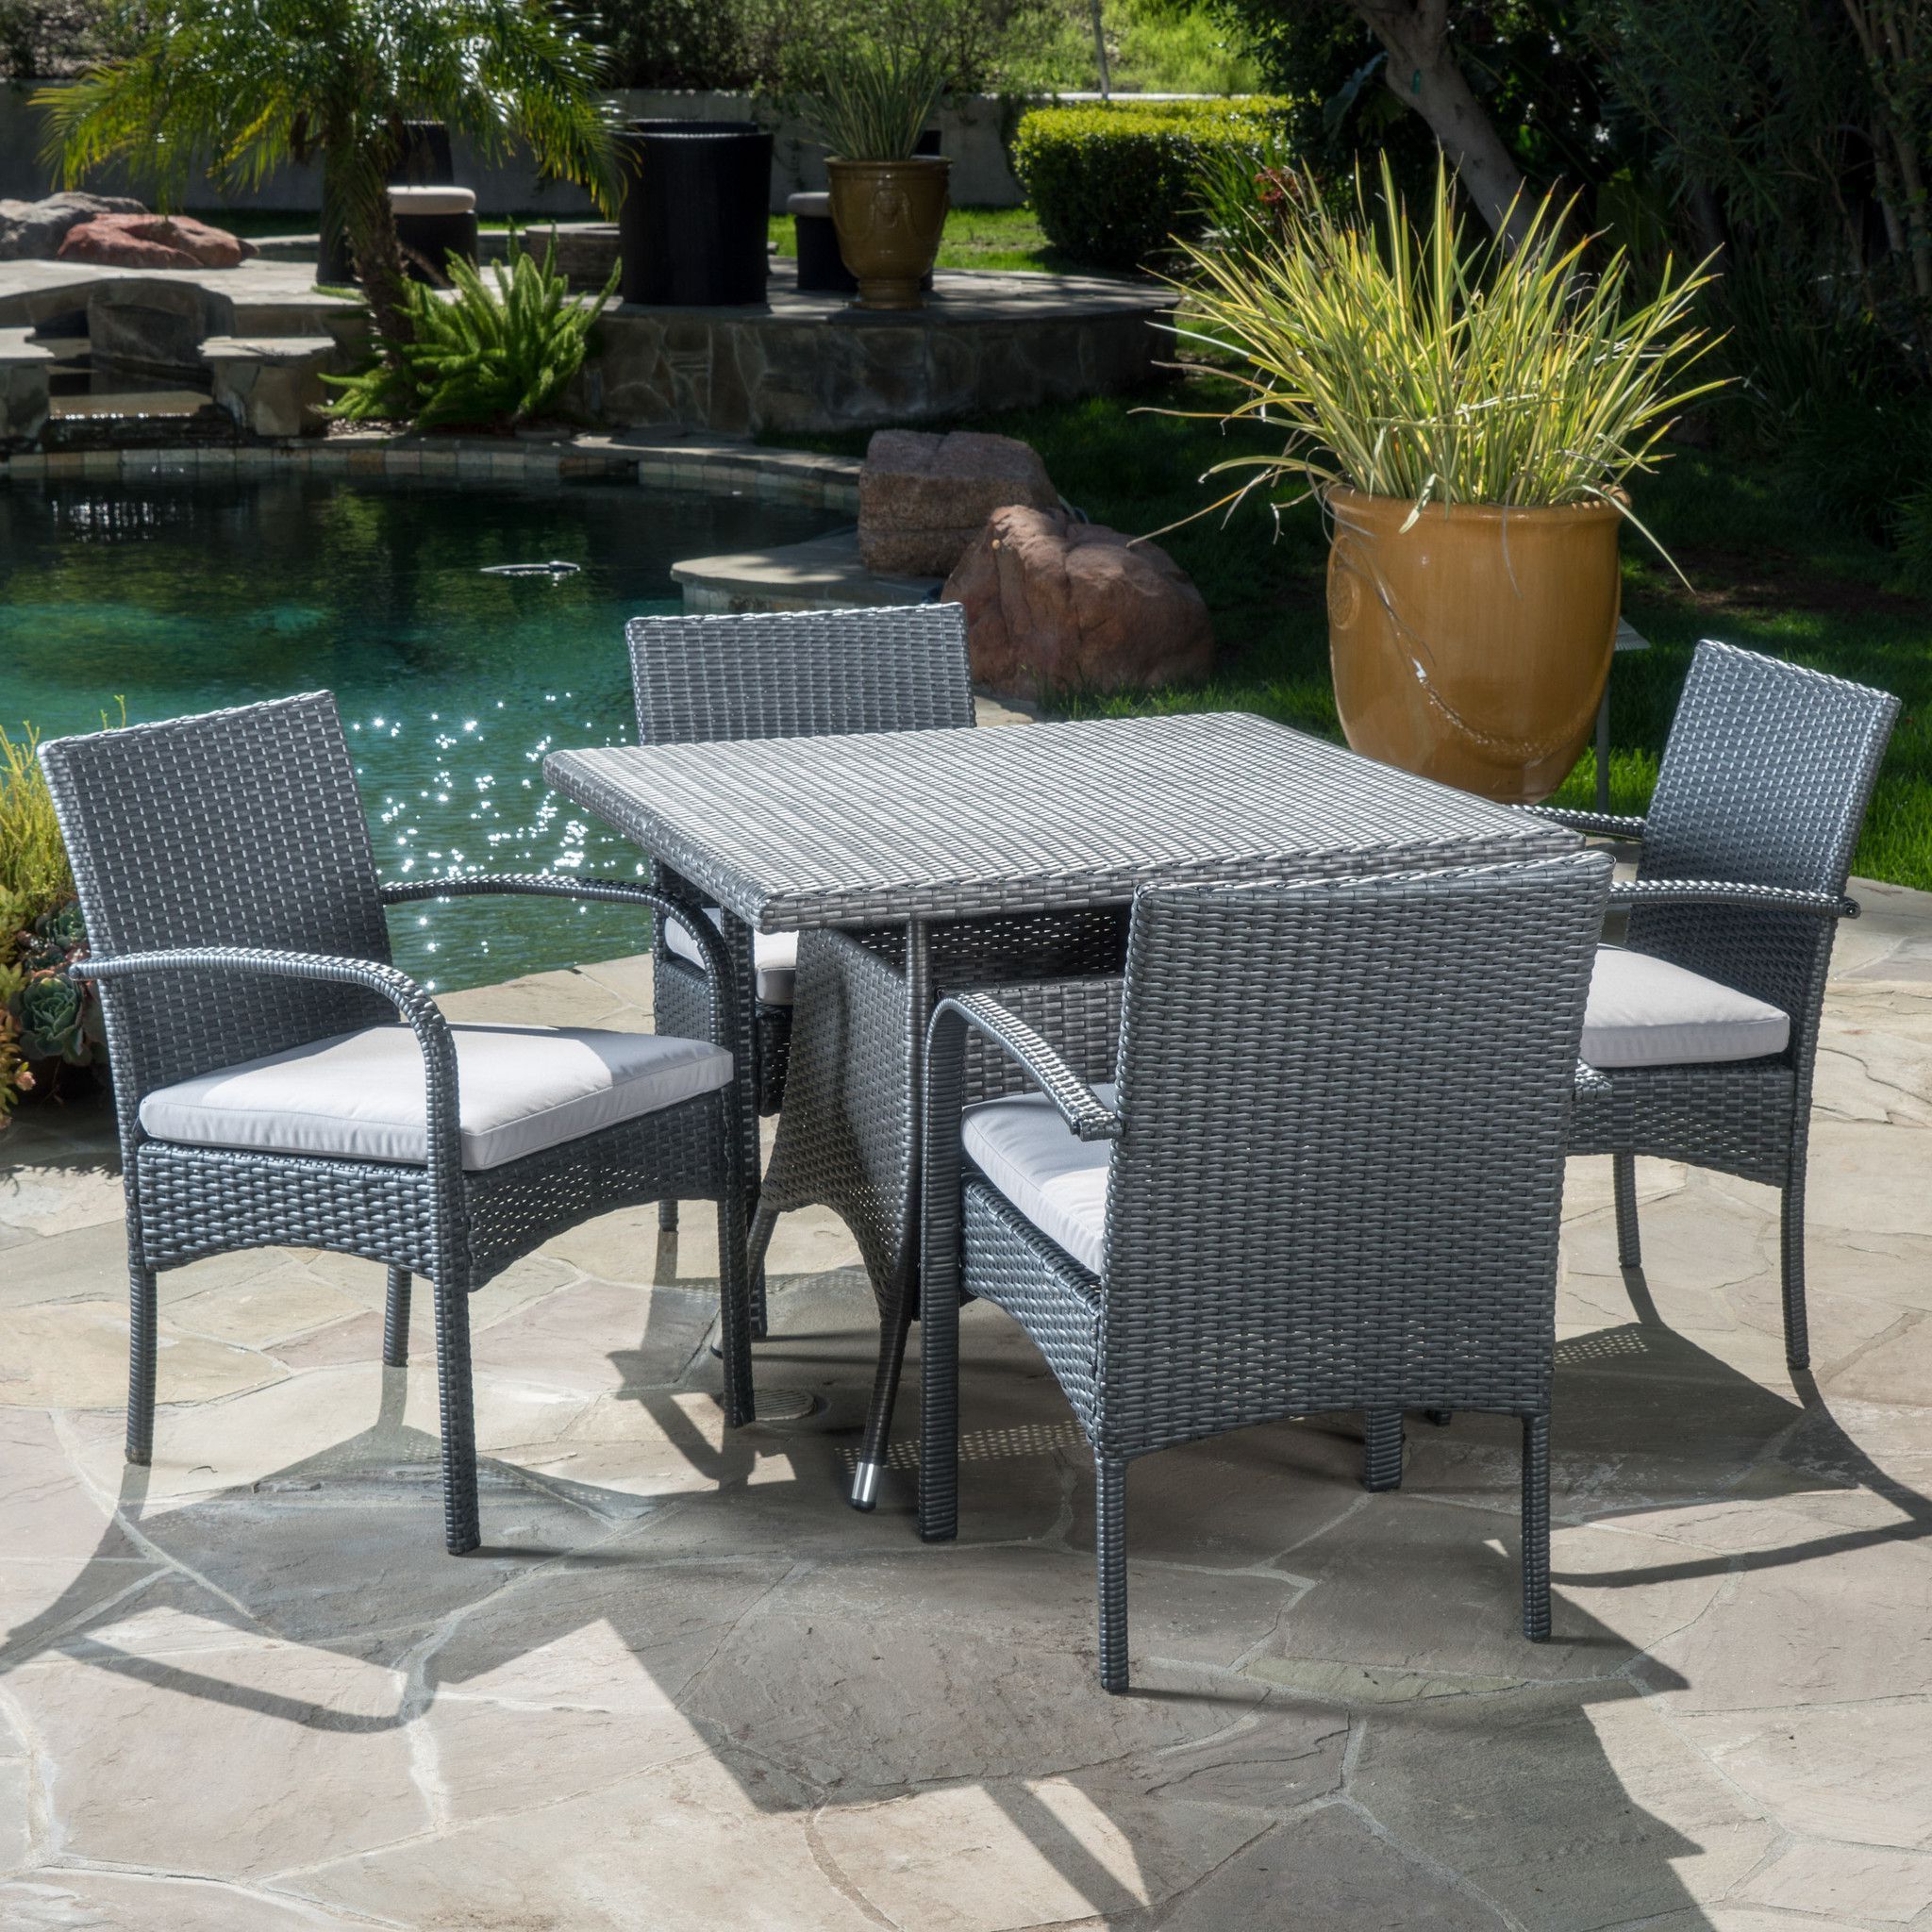 Gray Wicker 5 Piece Round Patio Dining Sets Within Current Pattinson Outdoor 5 Piece Grey Wicker Dining Set With Cushions (View 6 of 15)